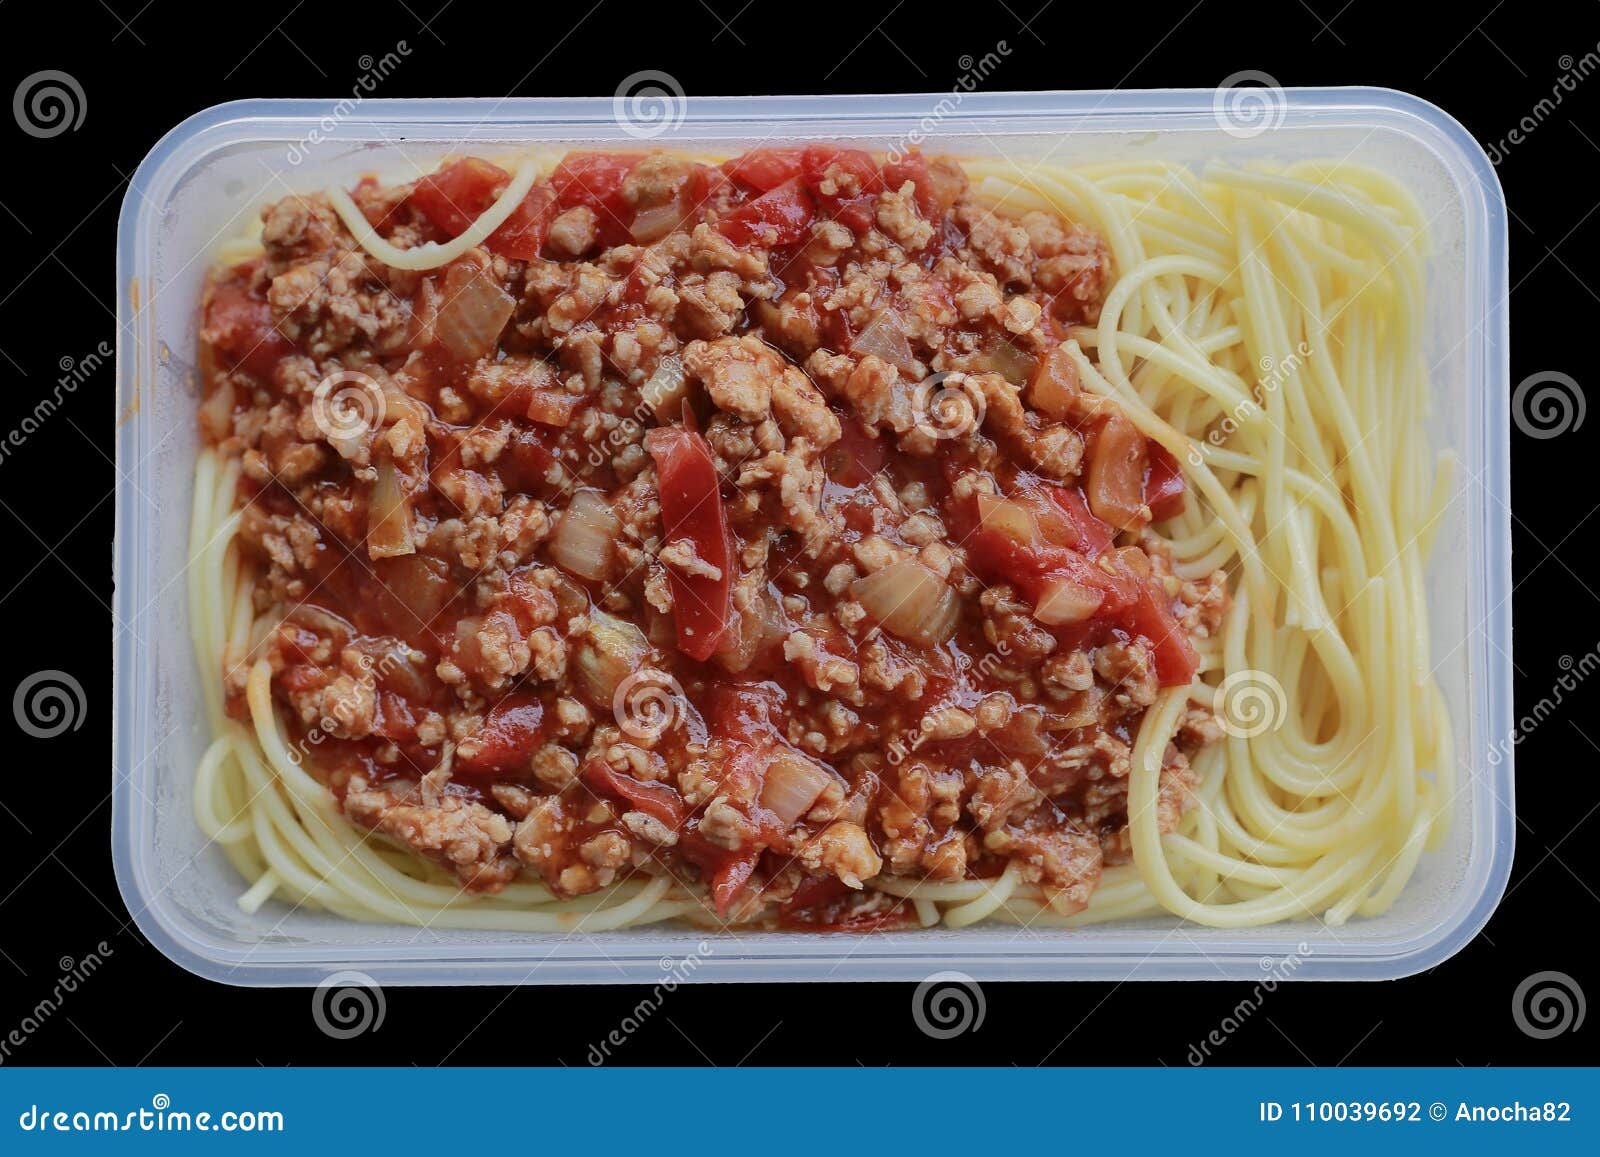 Download 2 330 Spaghetti Box Photos Free Royalty Free Stock Photos From Dreamstime Yellowimages Mockups